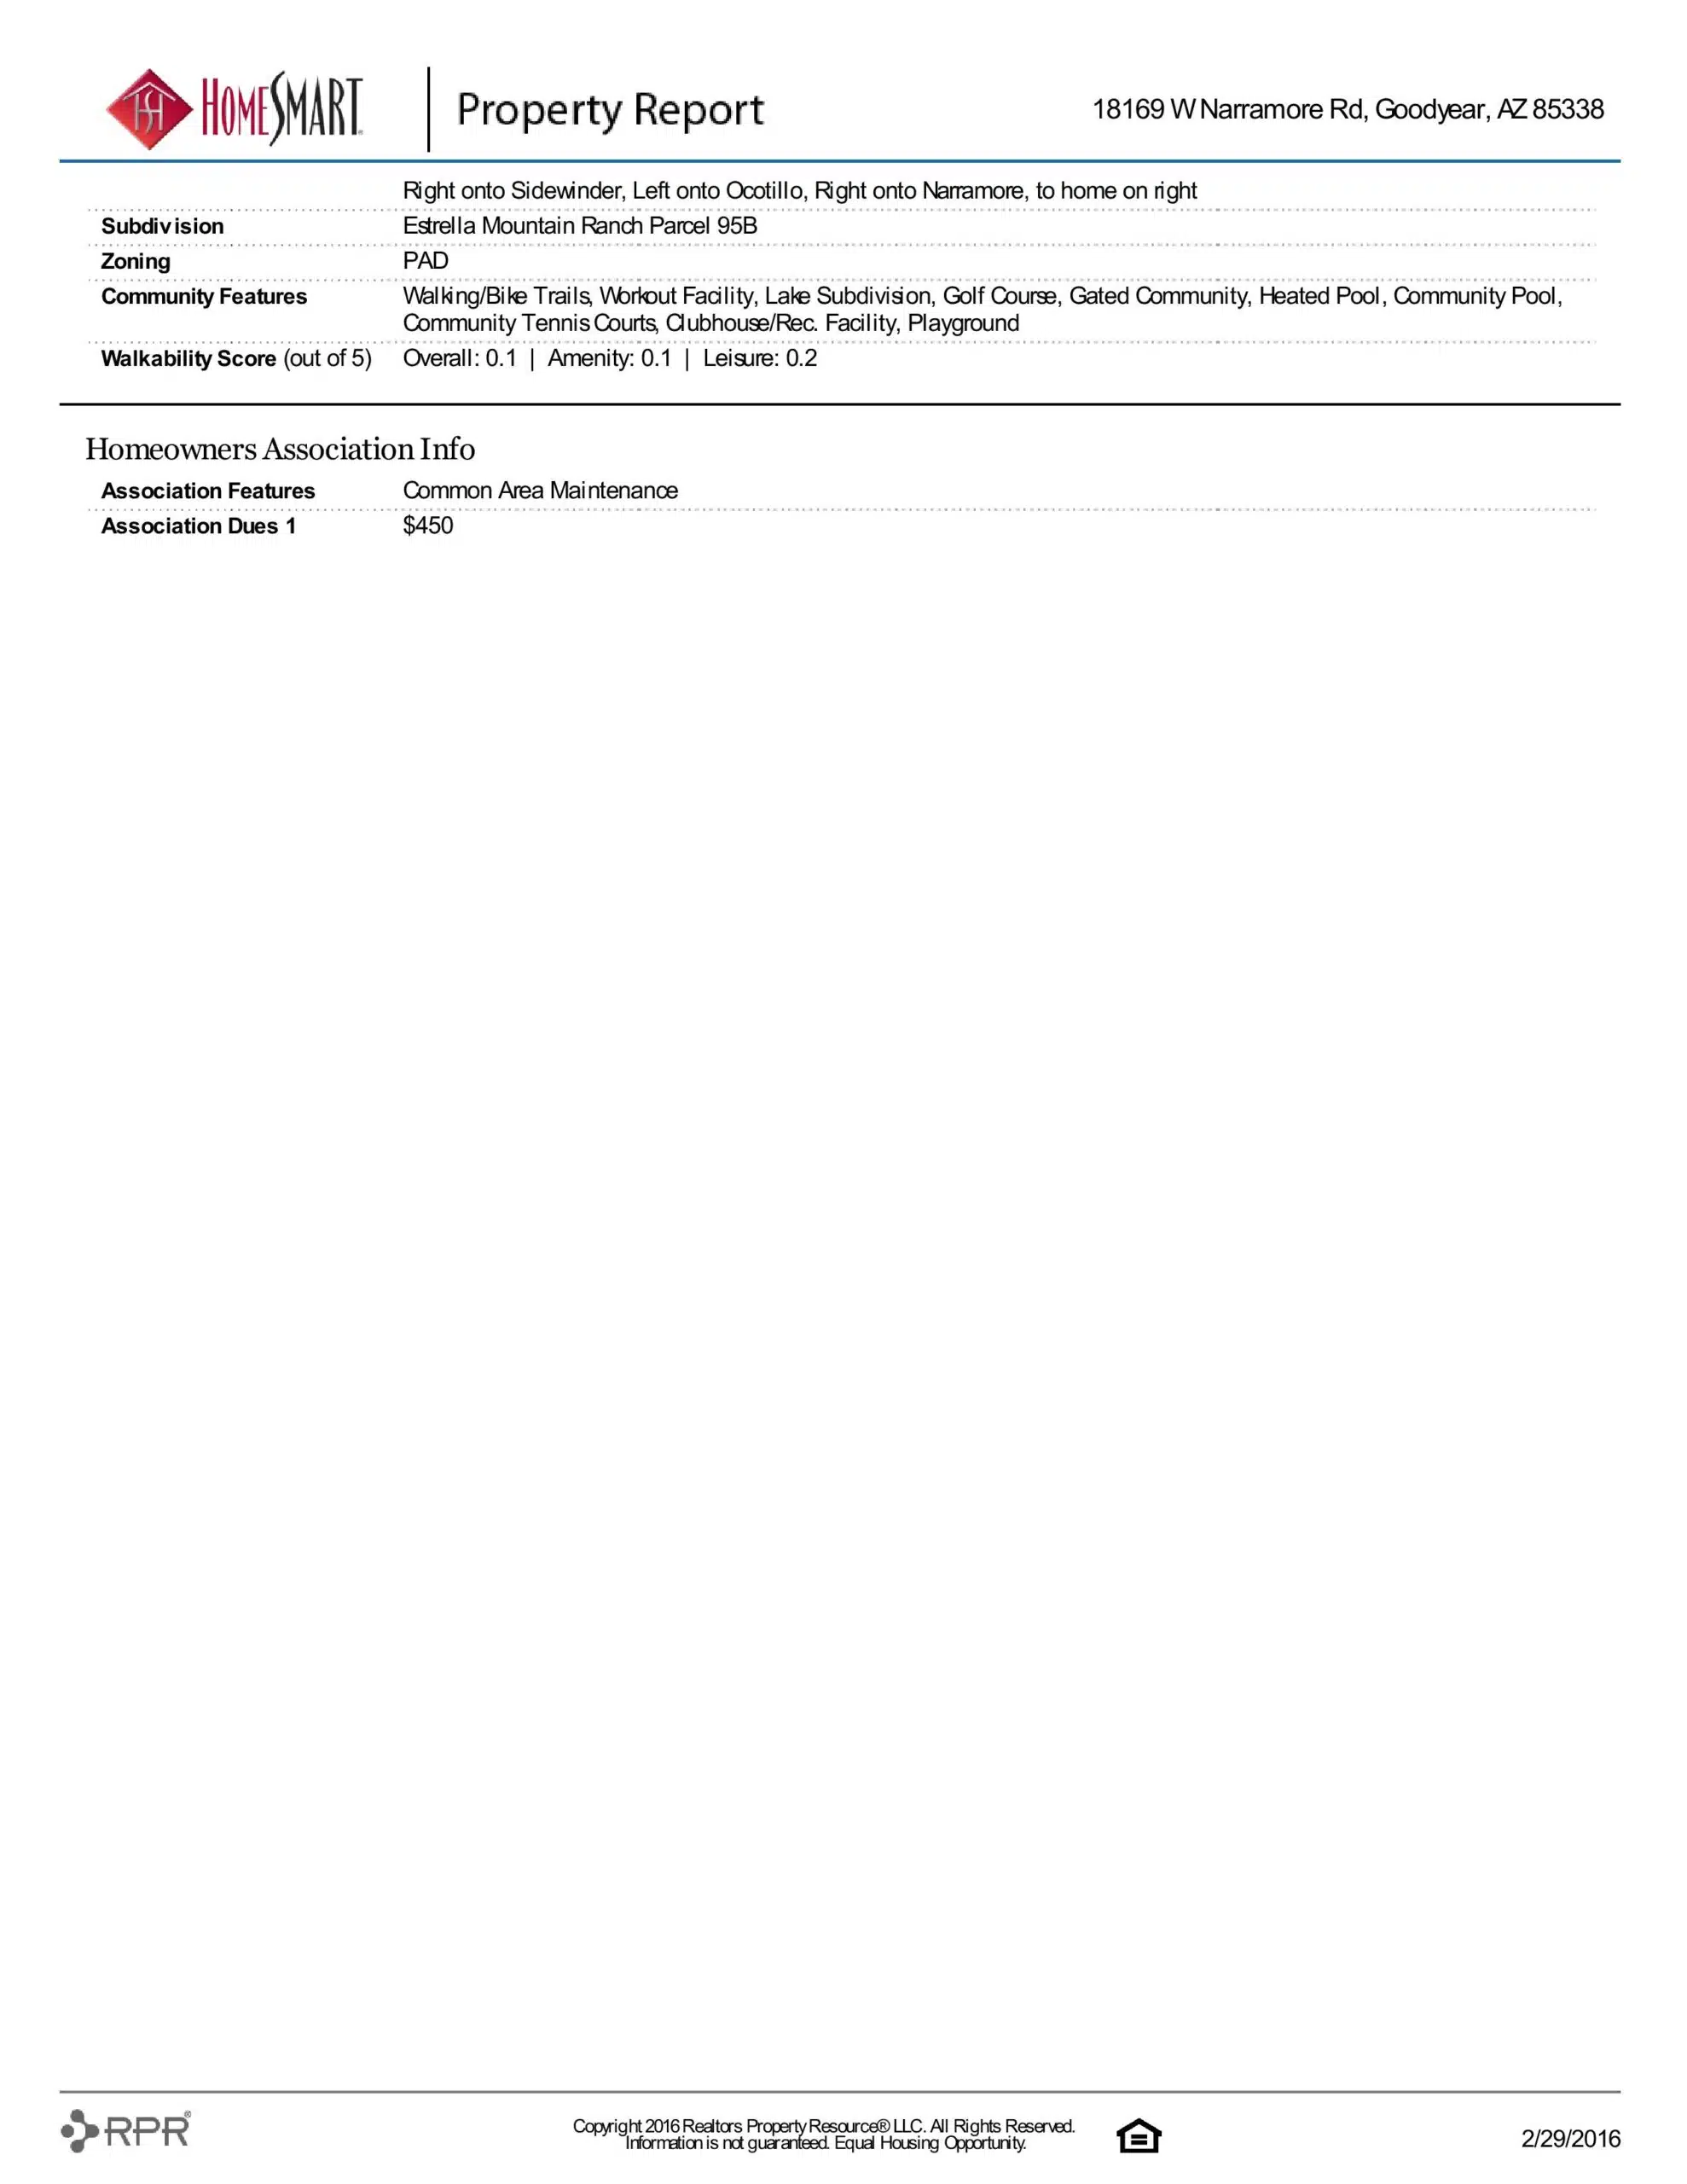 18169 W NARRAMORE RD PROPERTY REPORT-page-005